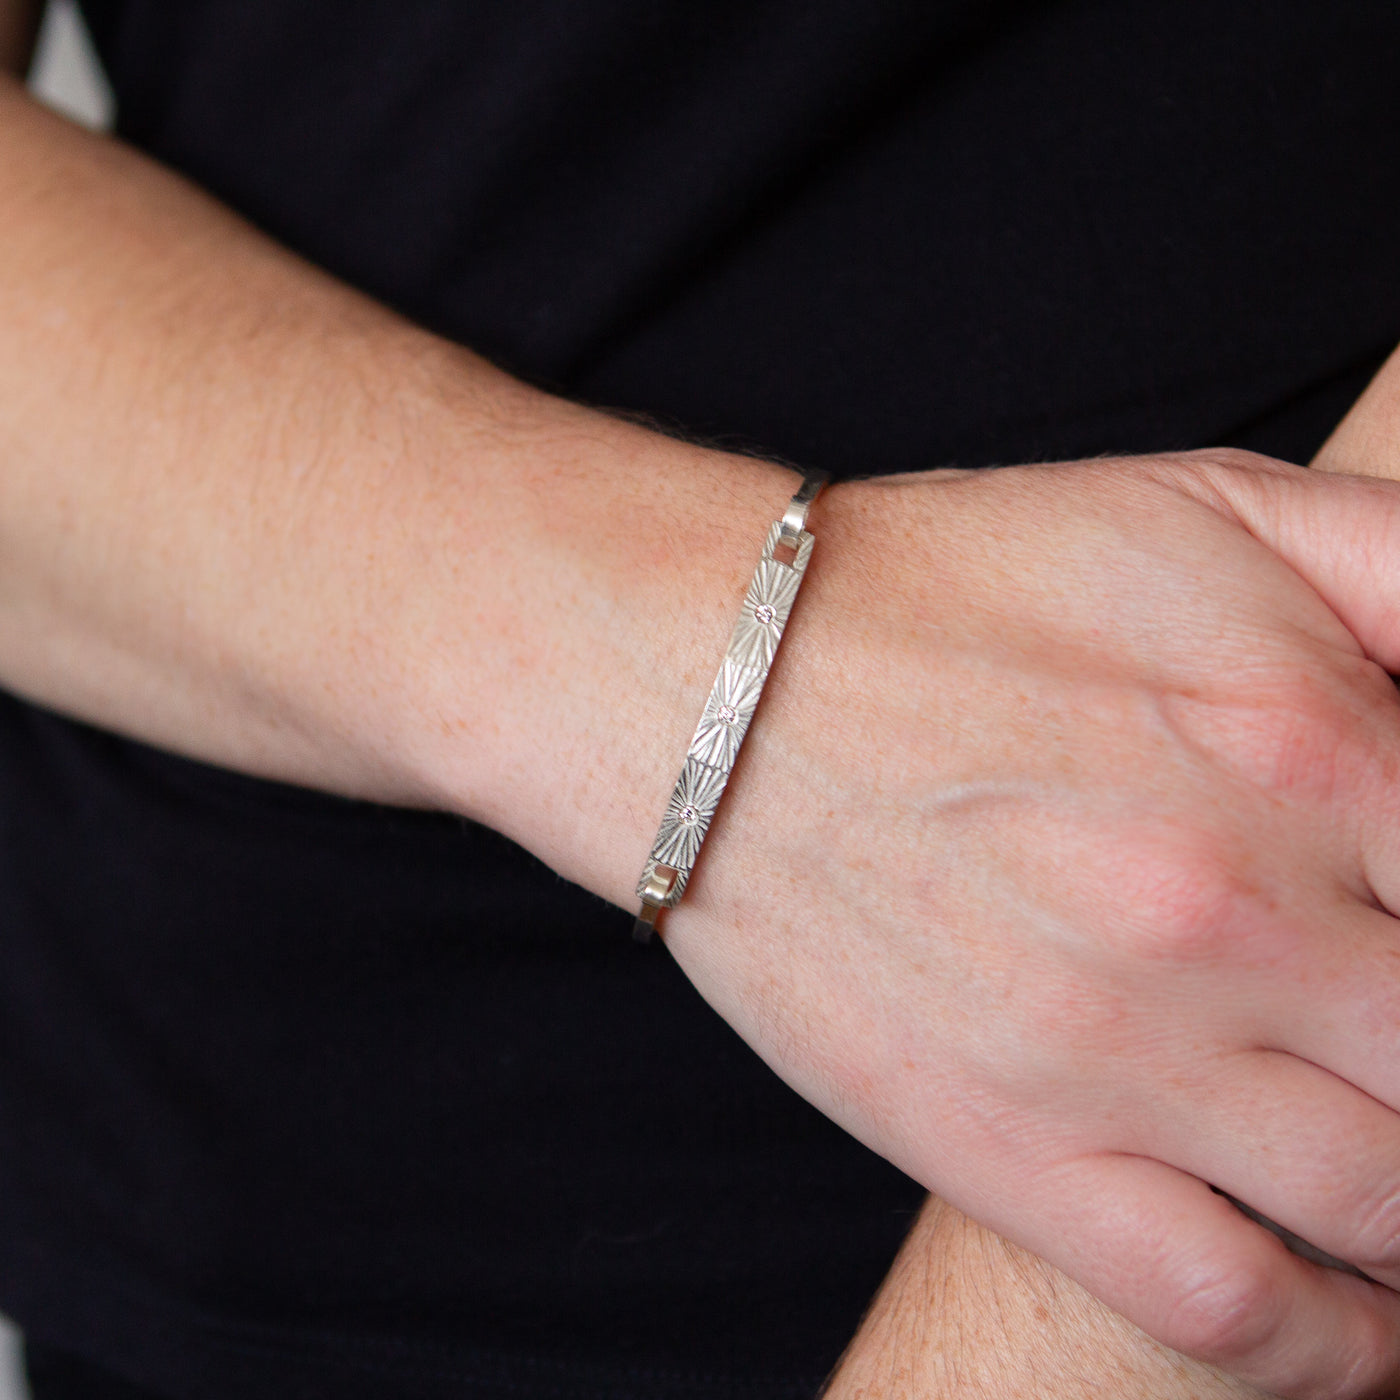 Sterling silver bar bracelet with three diamonds and a carved sunburst around each on a wrist by Corey Egan